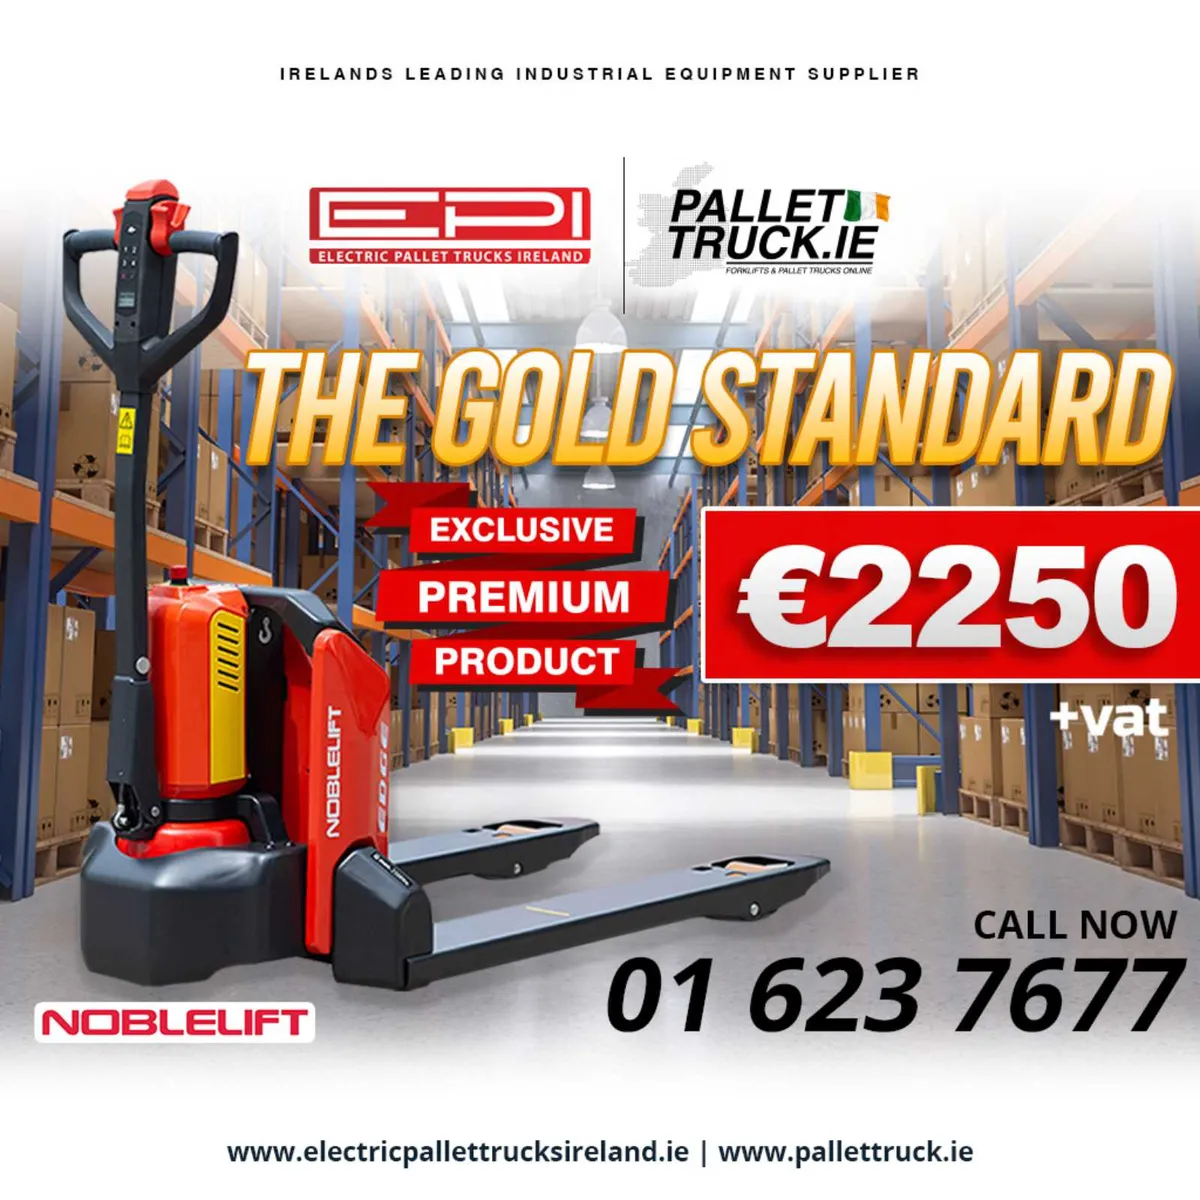 Pallet Truck Sale Hurry Up! - 01 623 7677 🇮🇪☘️